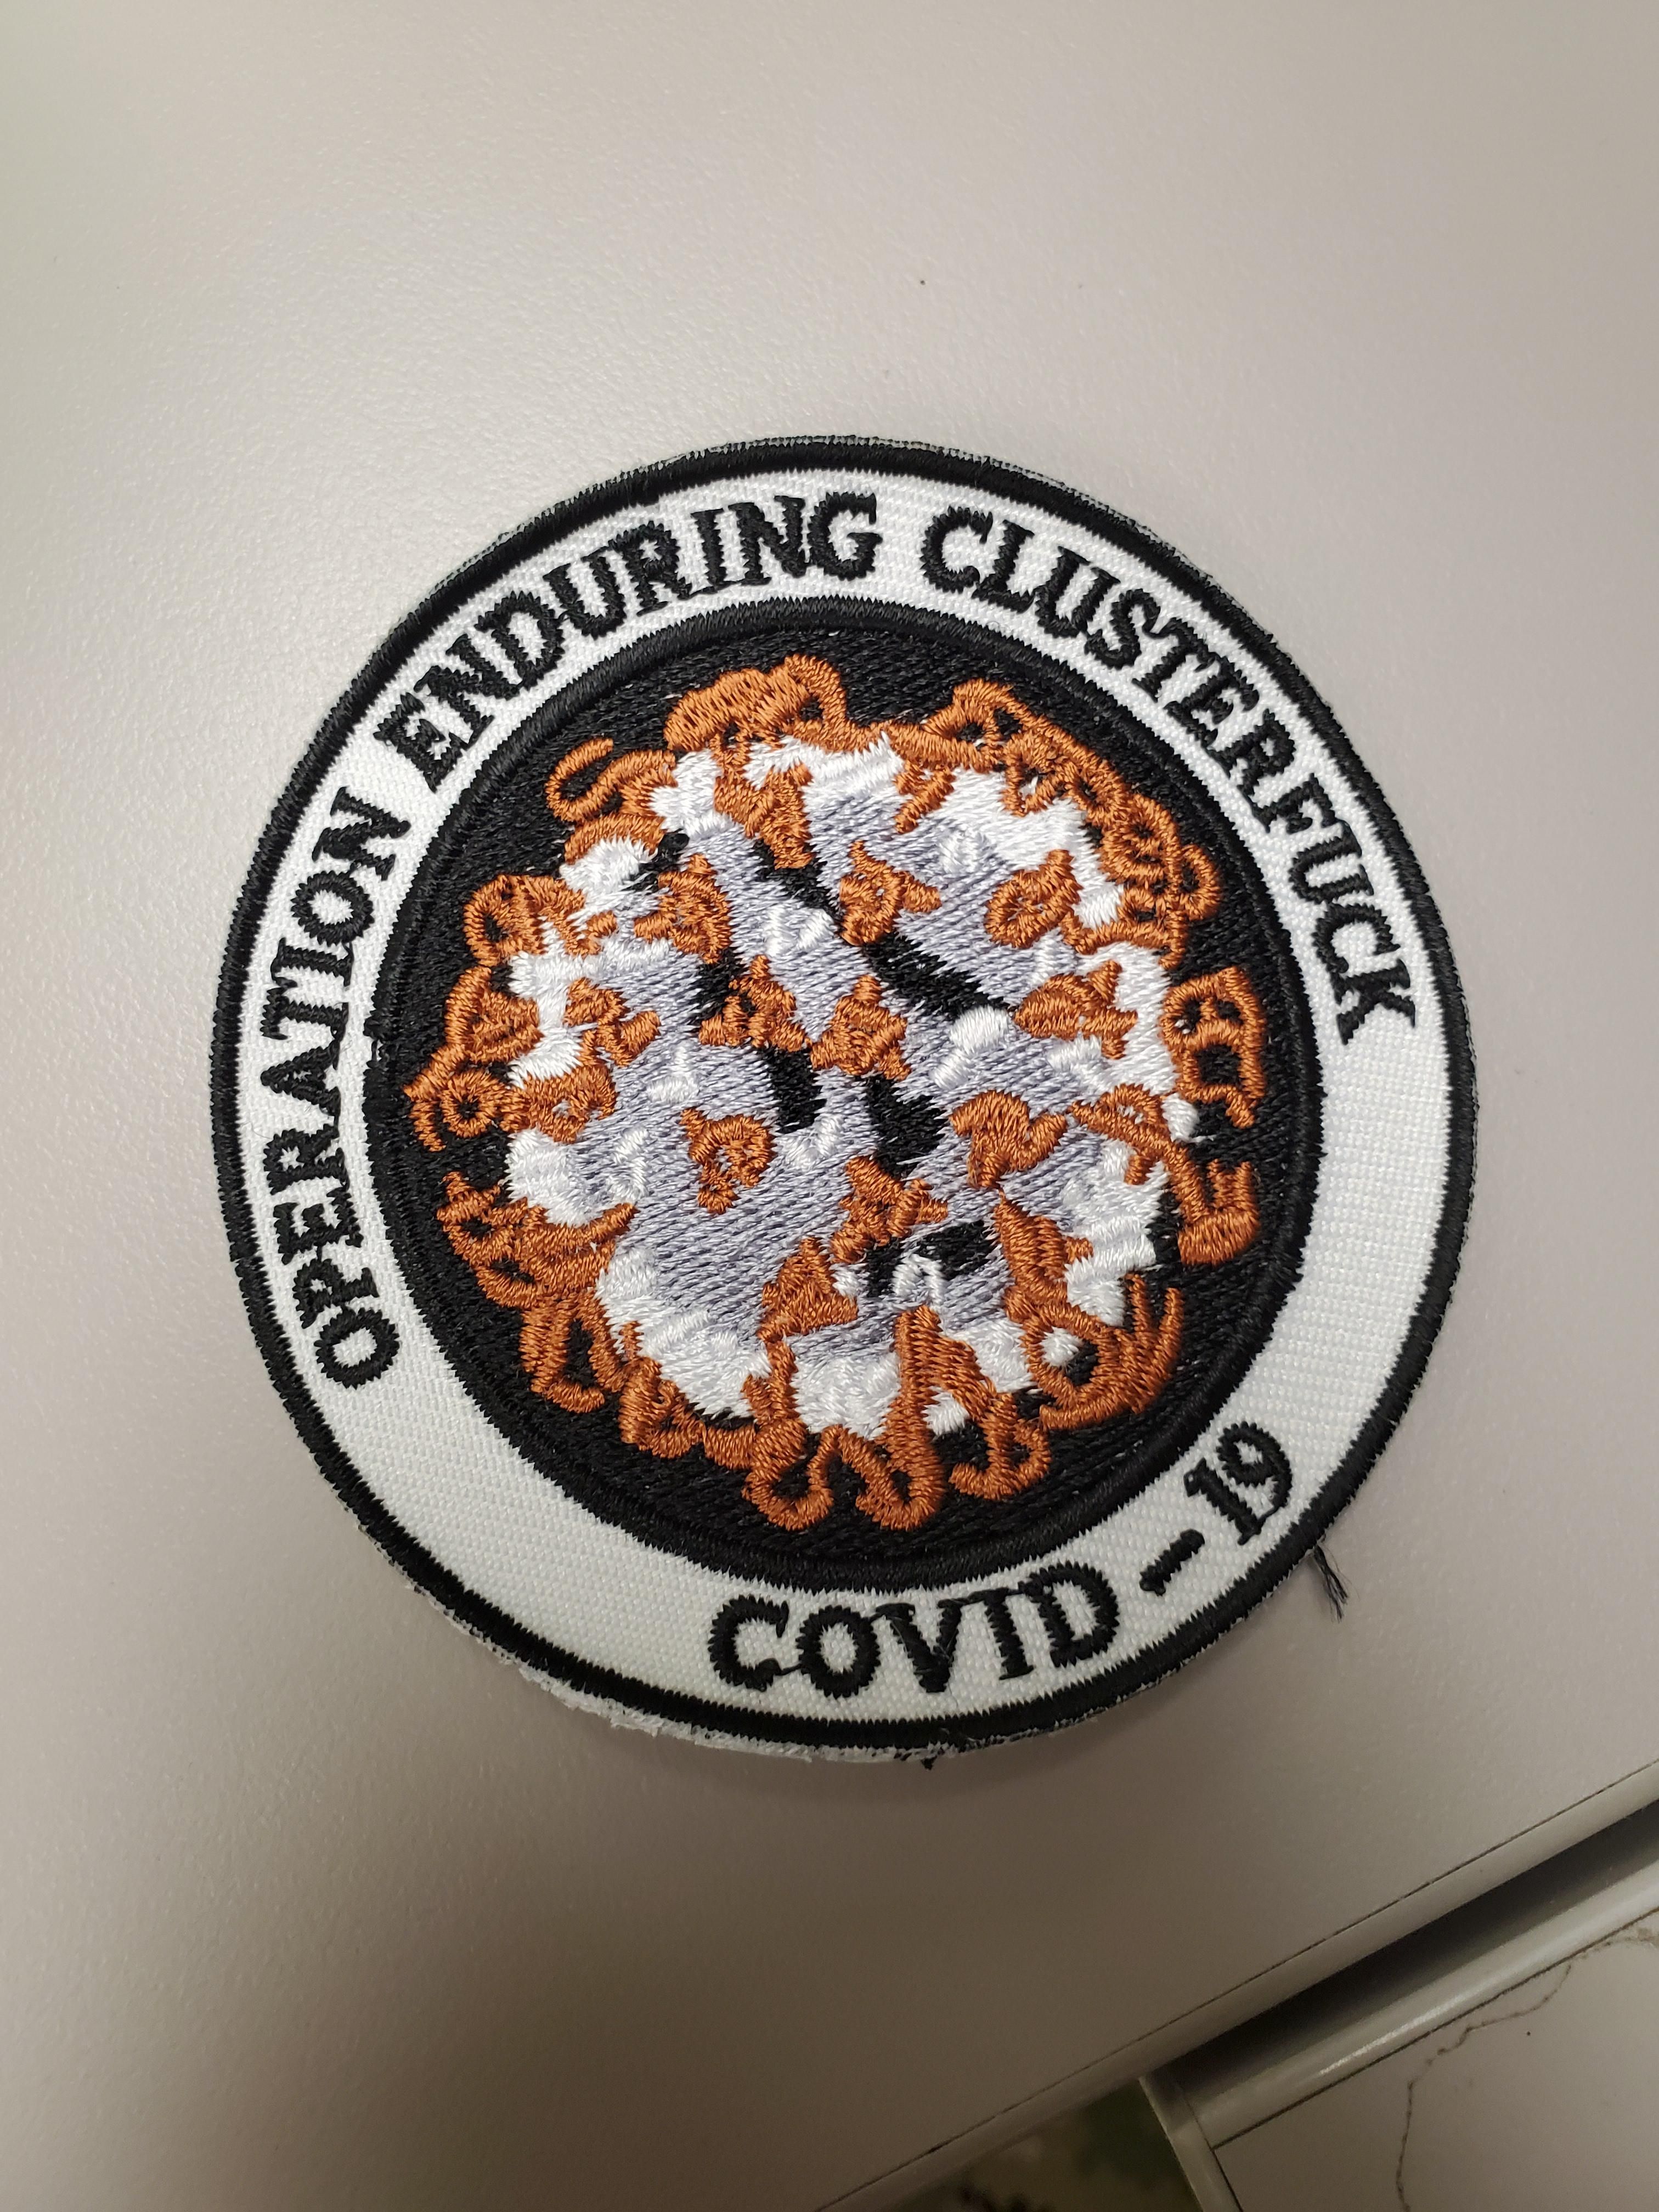 Someone made Patches in honor of COVID.